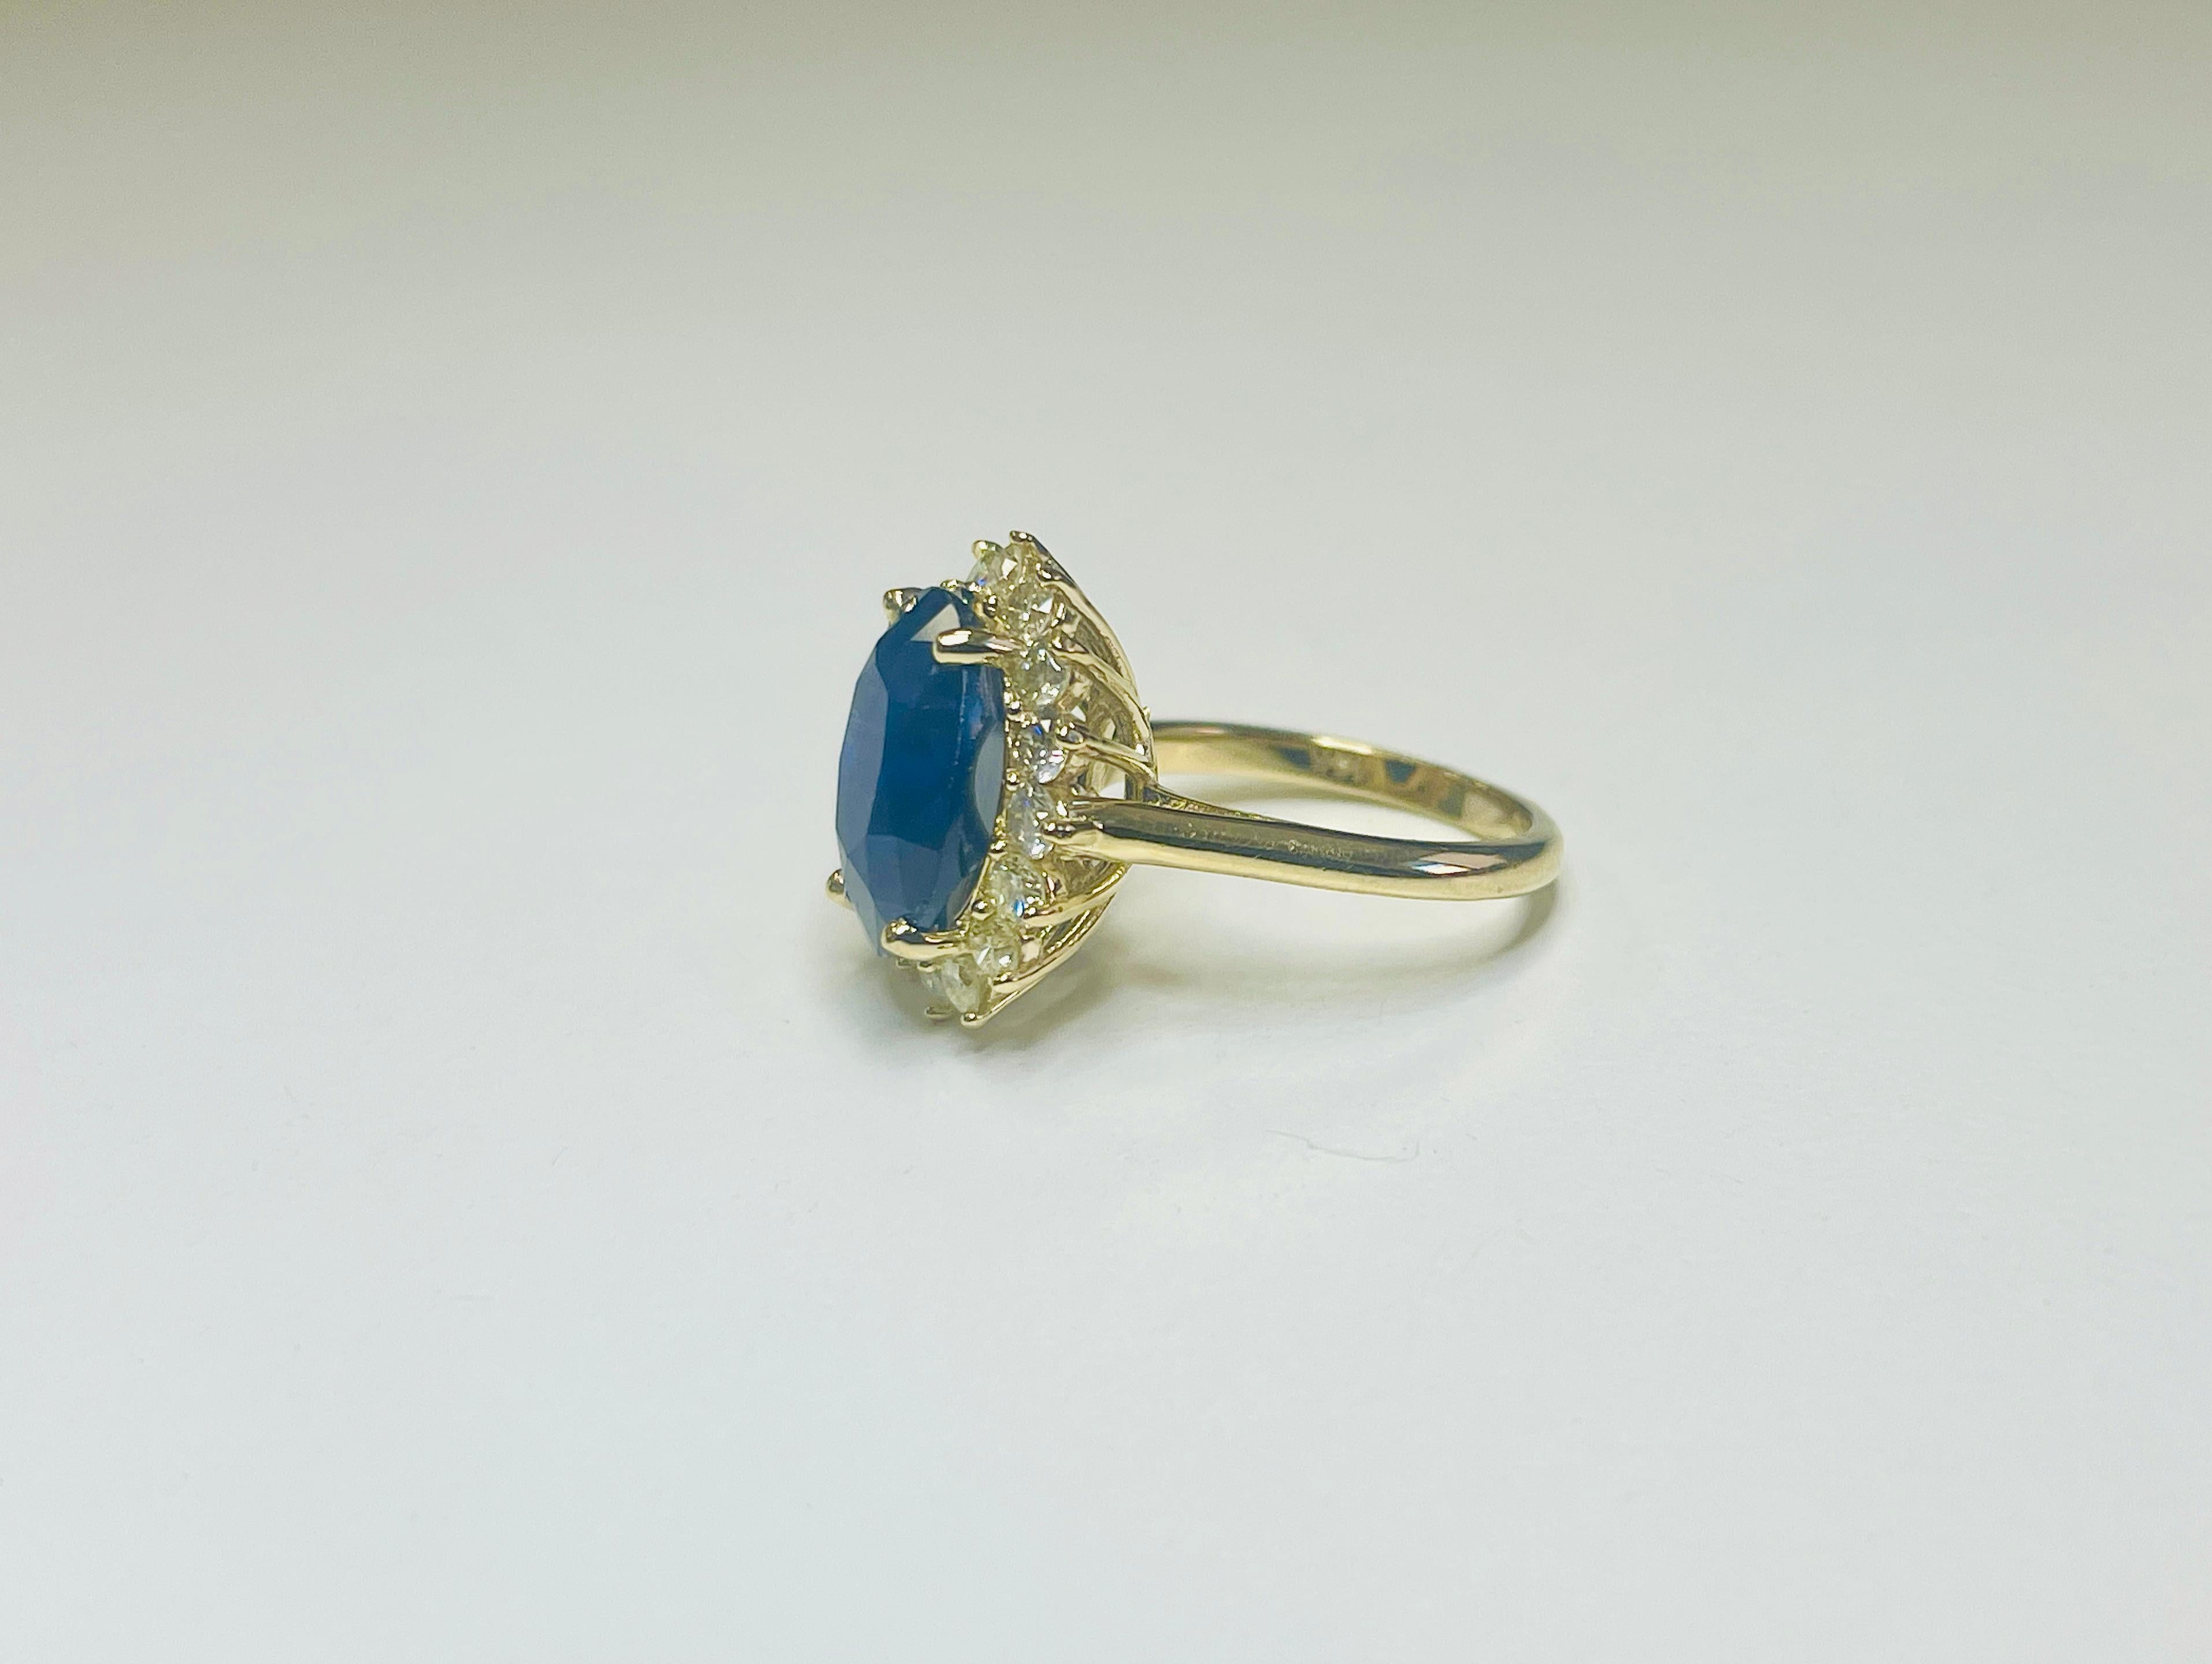 8.71 Carat Intense Blue Oval Cut Natural Sapphire 14K Yellow Gold Diamond Ring In New Condition For Sale In Great Neck, NY